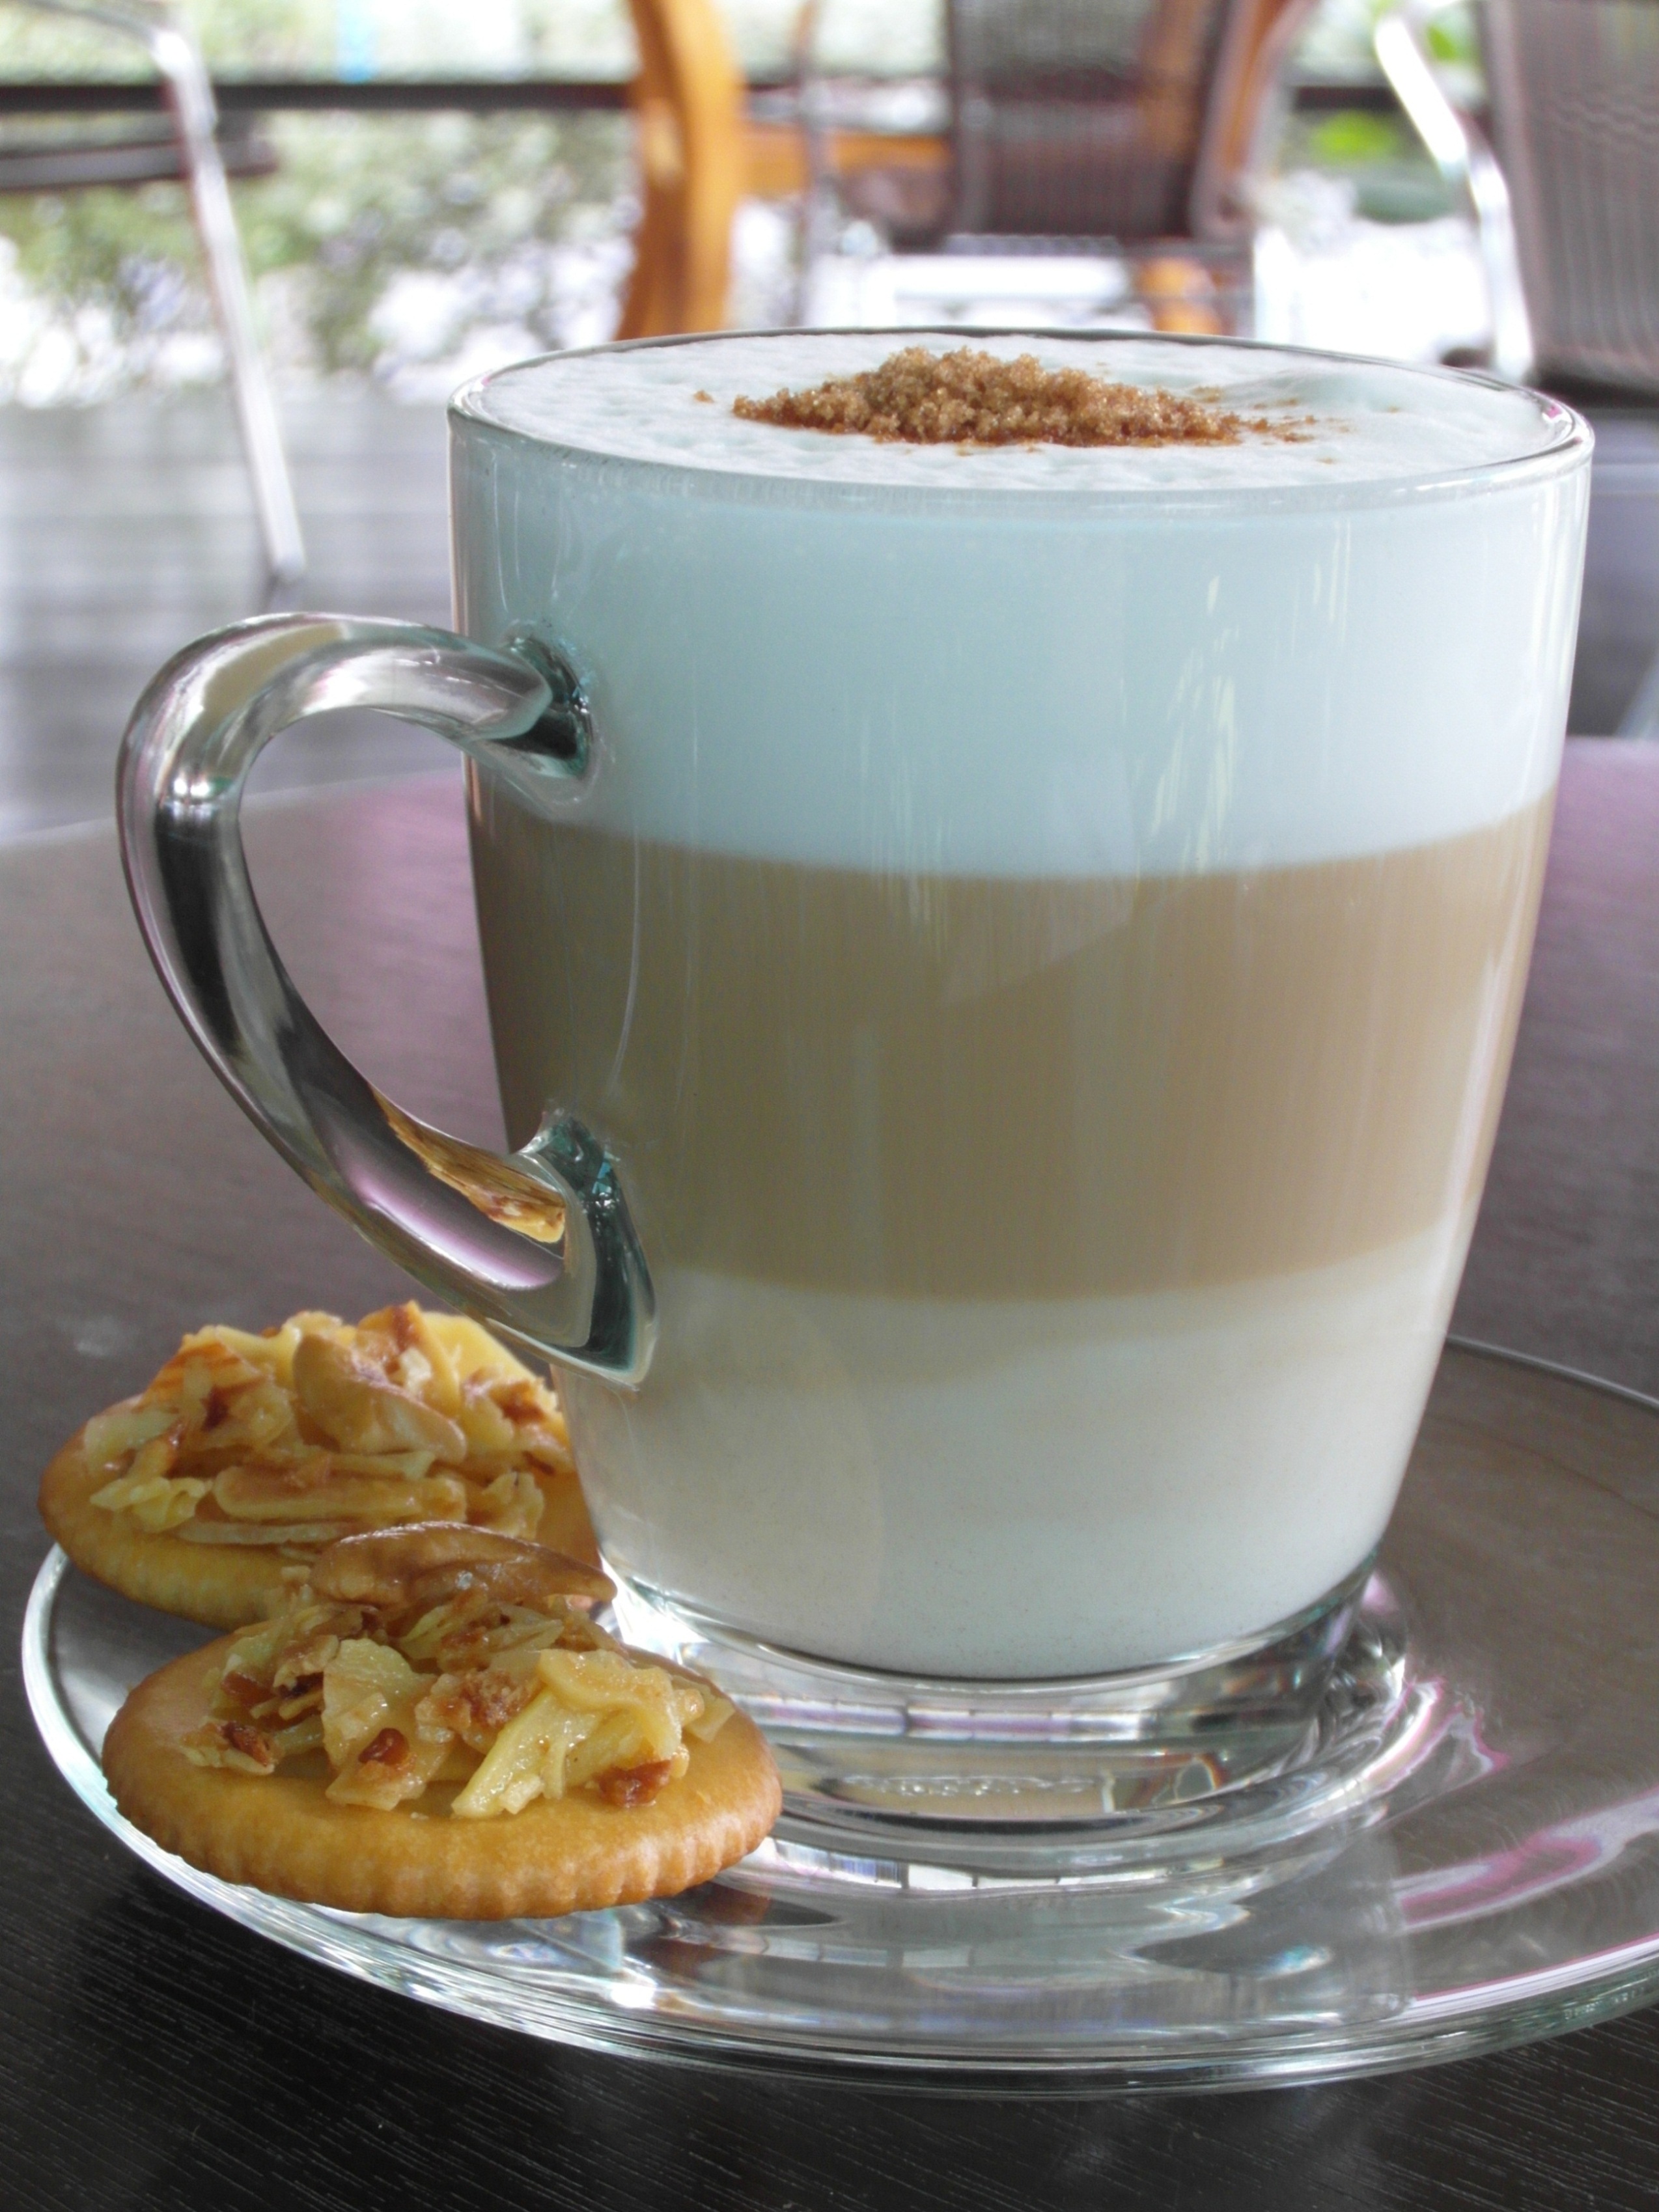 Layered Latte with biscuits, Pretty, Hot, Latte, Layered, HQ Photo